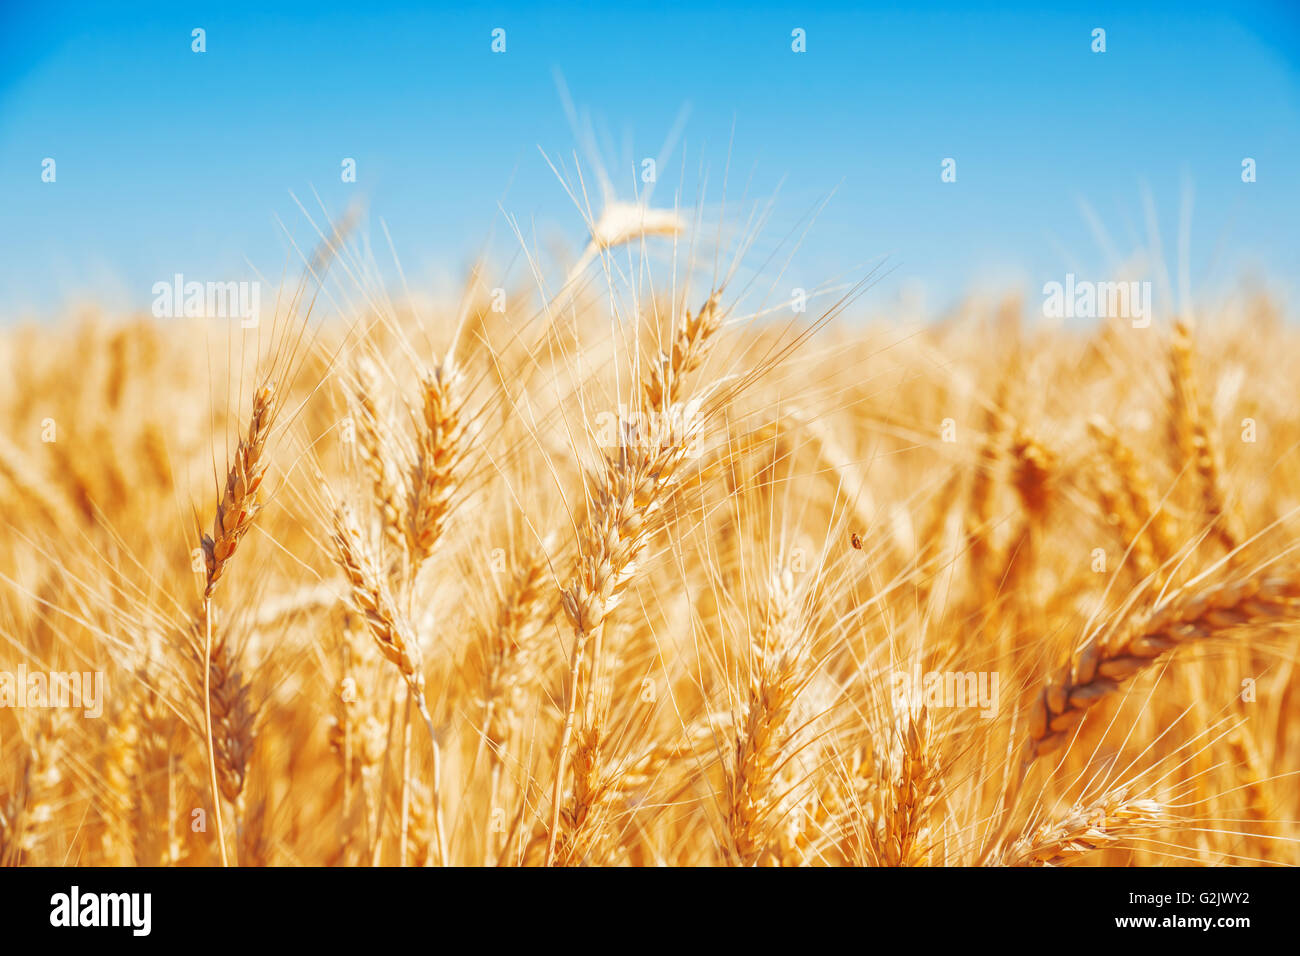 Gold wheat field and blue sky Stock Photo